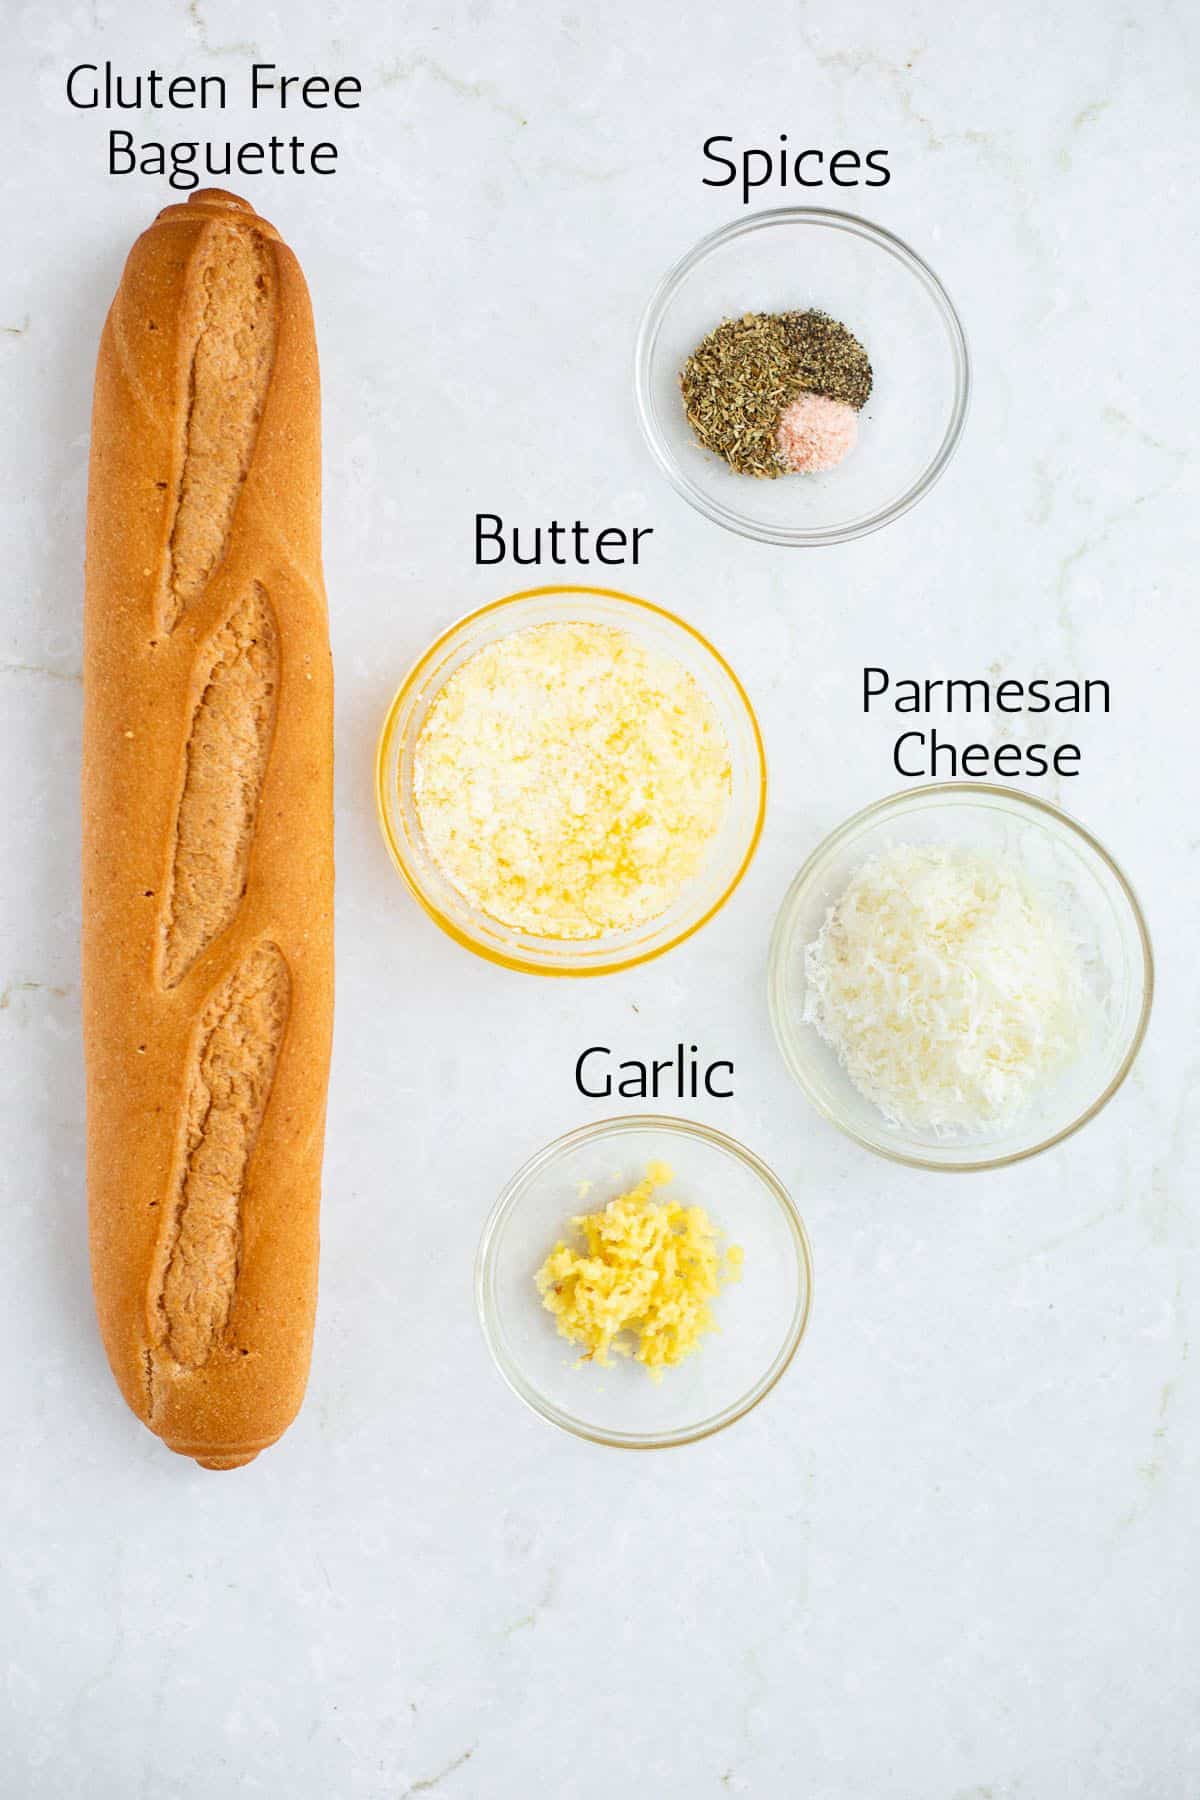 ingredients for gluten free garlic bread labeled with black text.